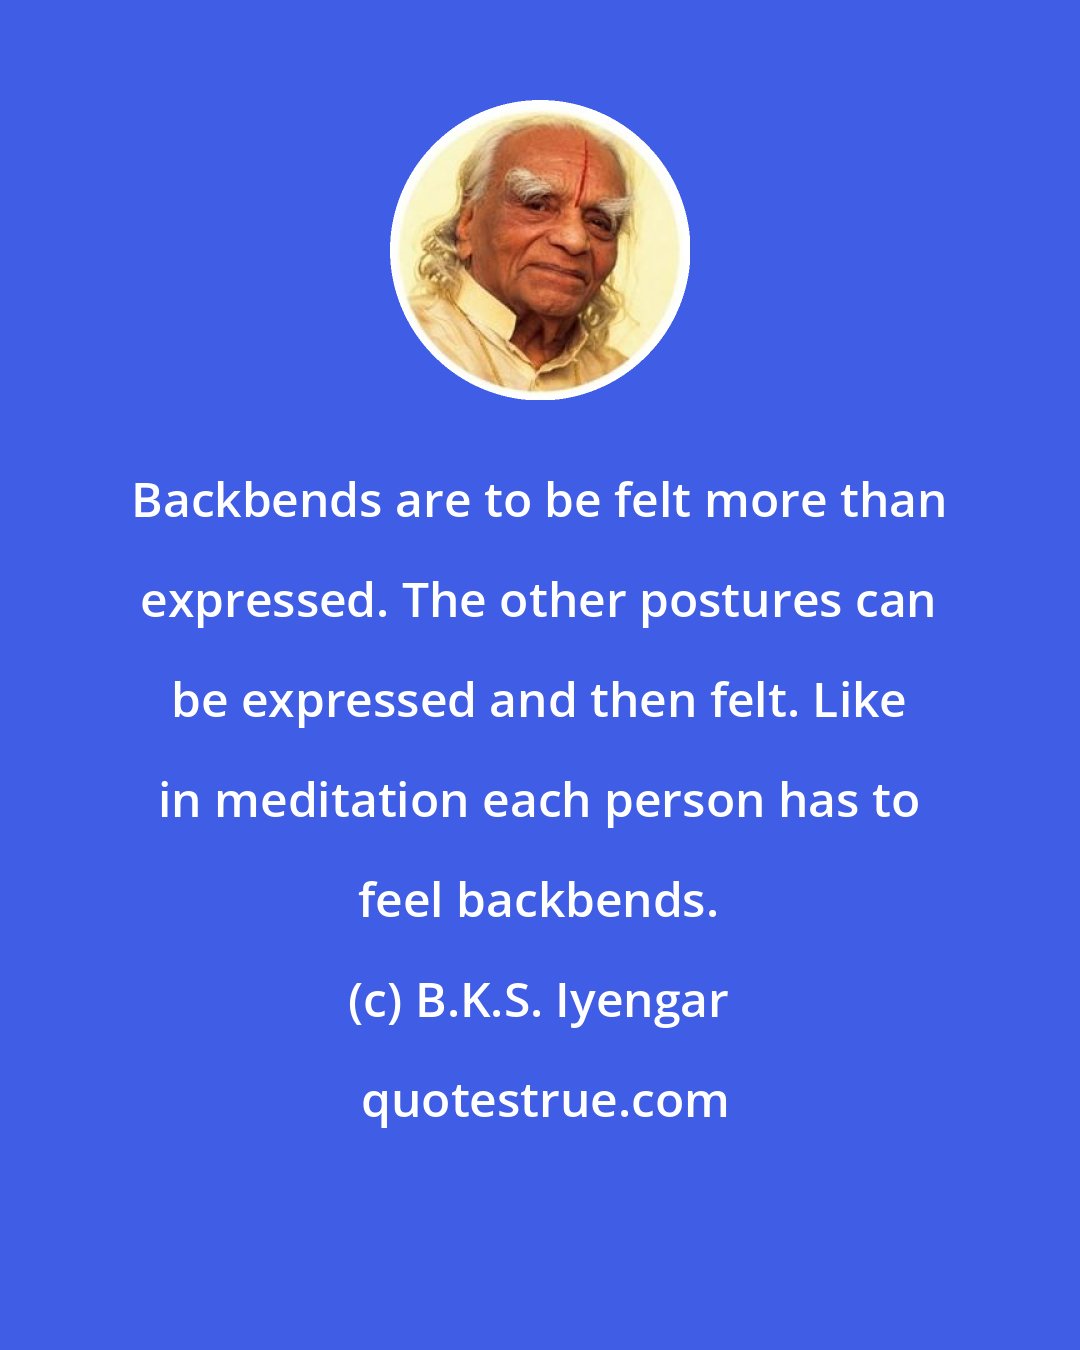 B.K.S. Iyengar: Backbends are to be felt more than expressed. The other postures can be expressed and then felt. Like in meditation each person has to feel backbends.